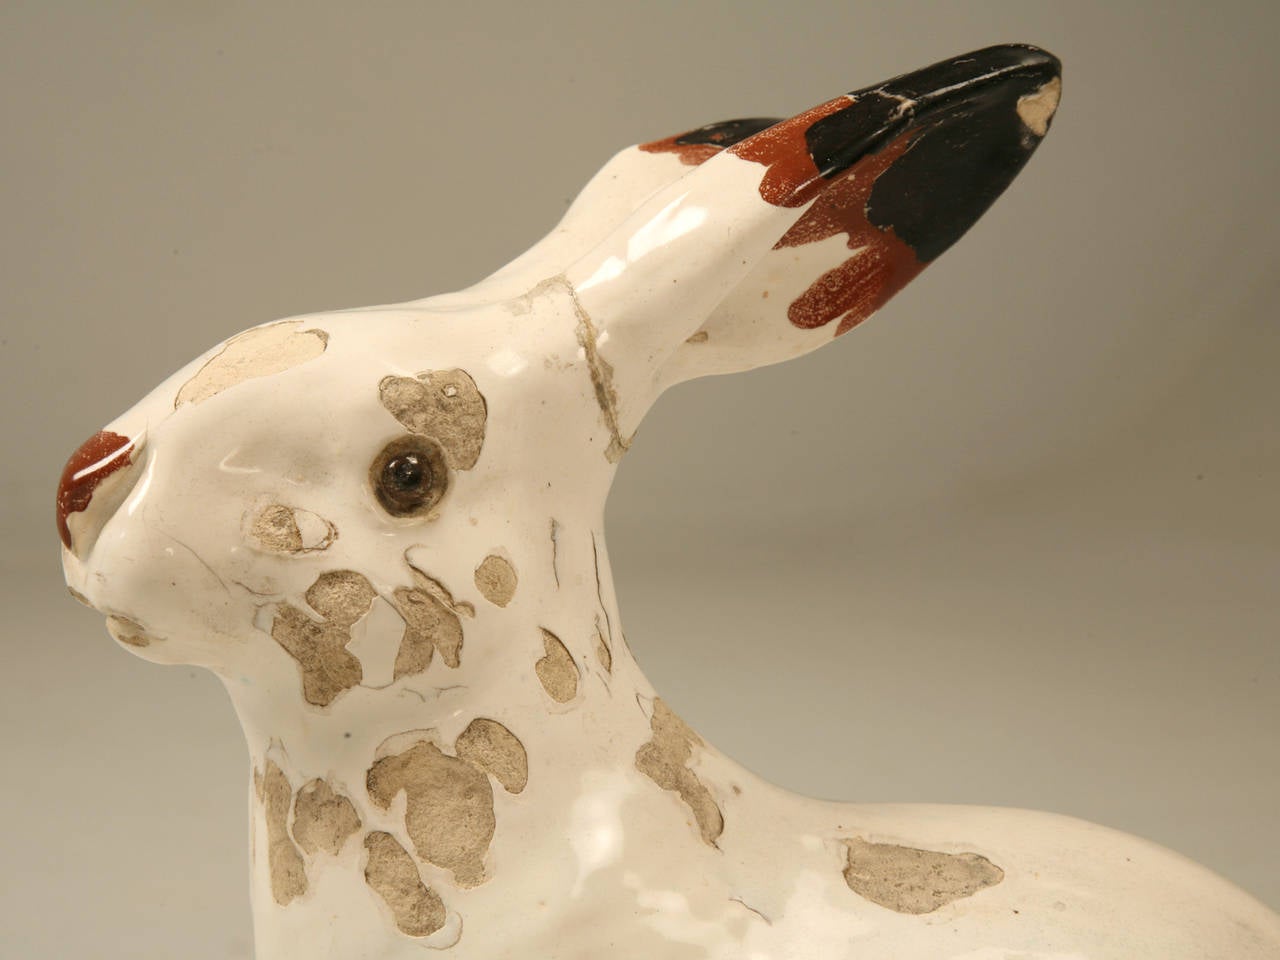 Early 20th Century Earthenware Rabbit from Calvados Region of France